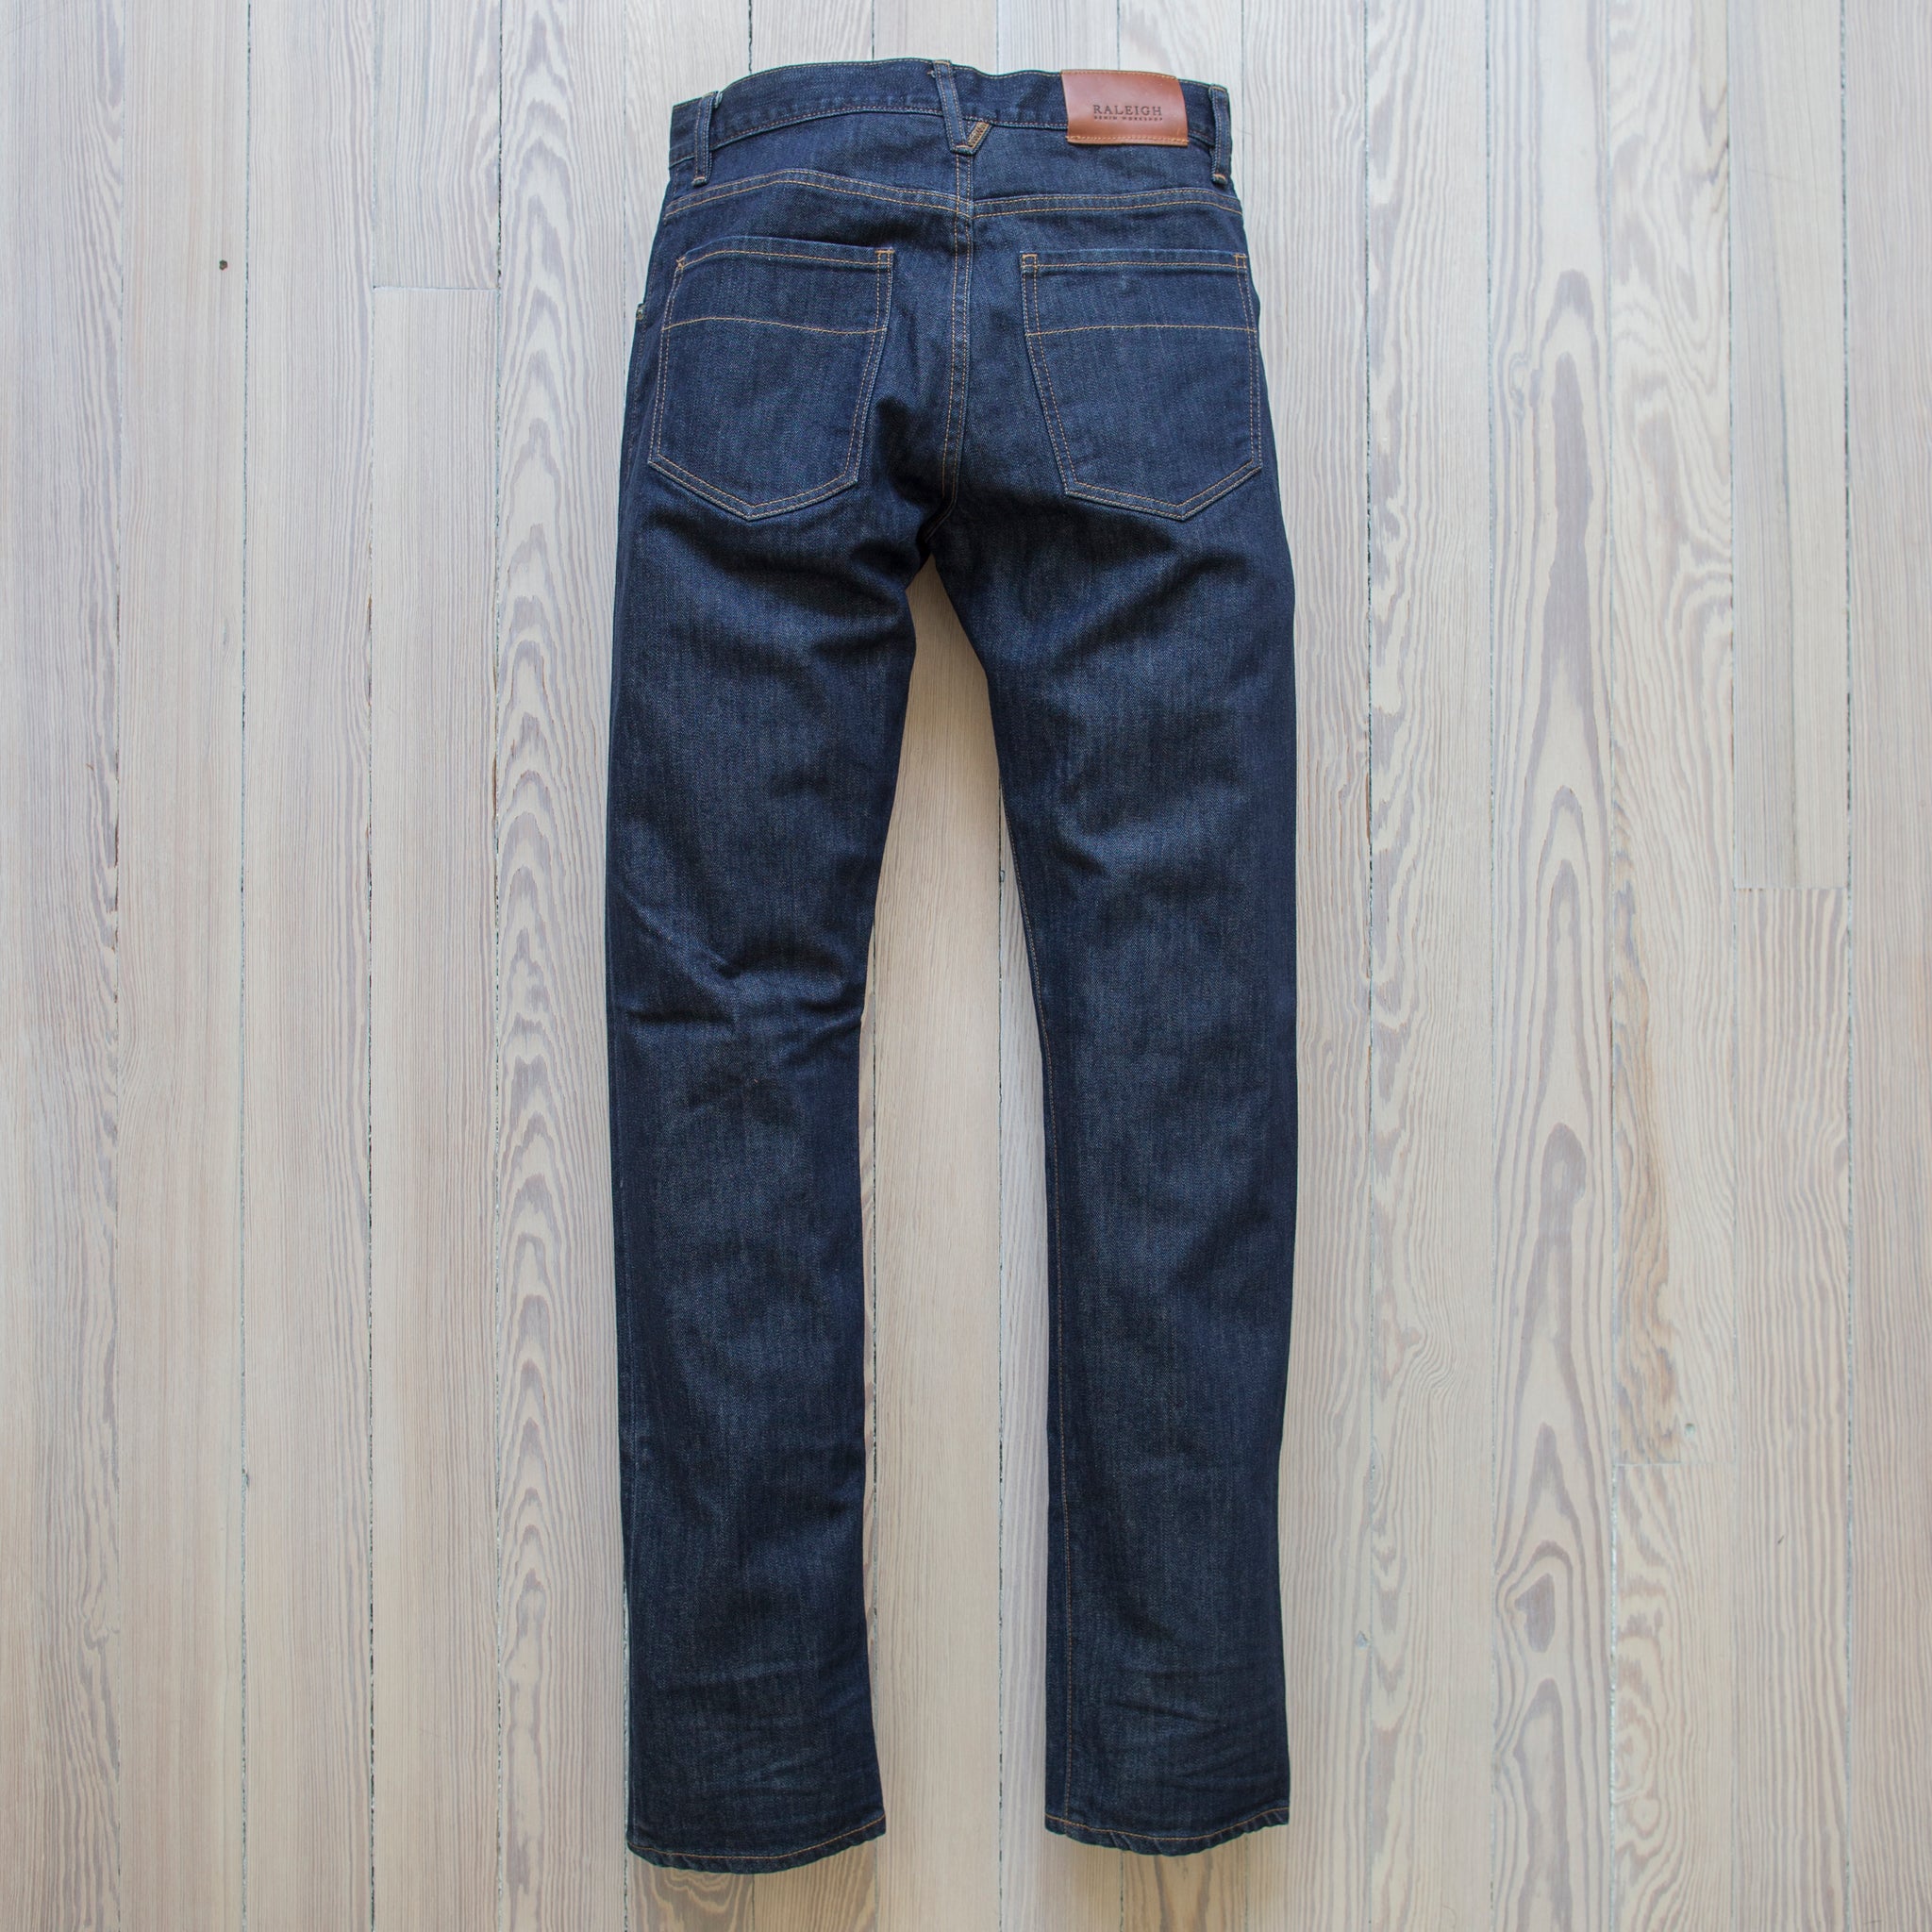 angle: resin rinse  Raleigh Denim Workshop Alexander work fit jeans with a dark wash, front view